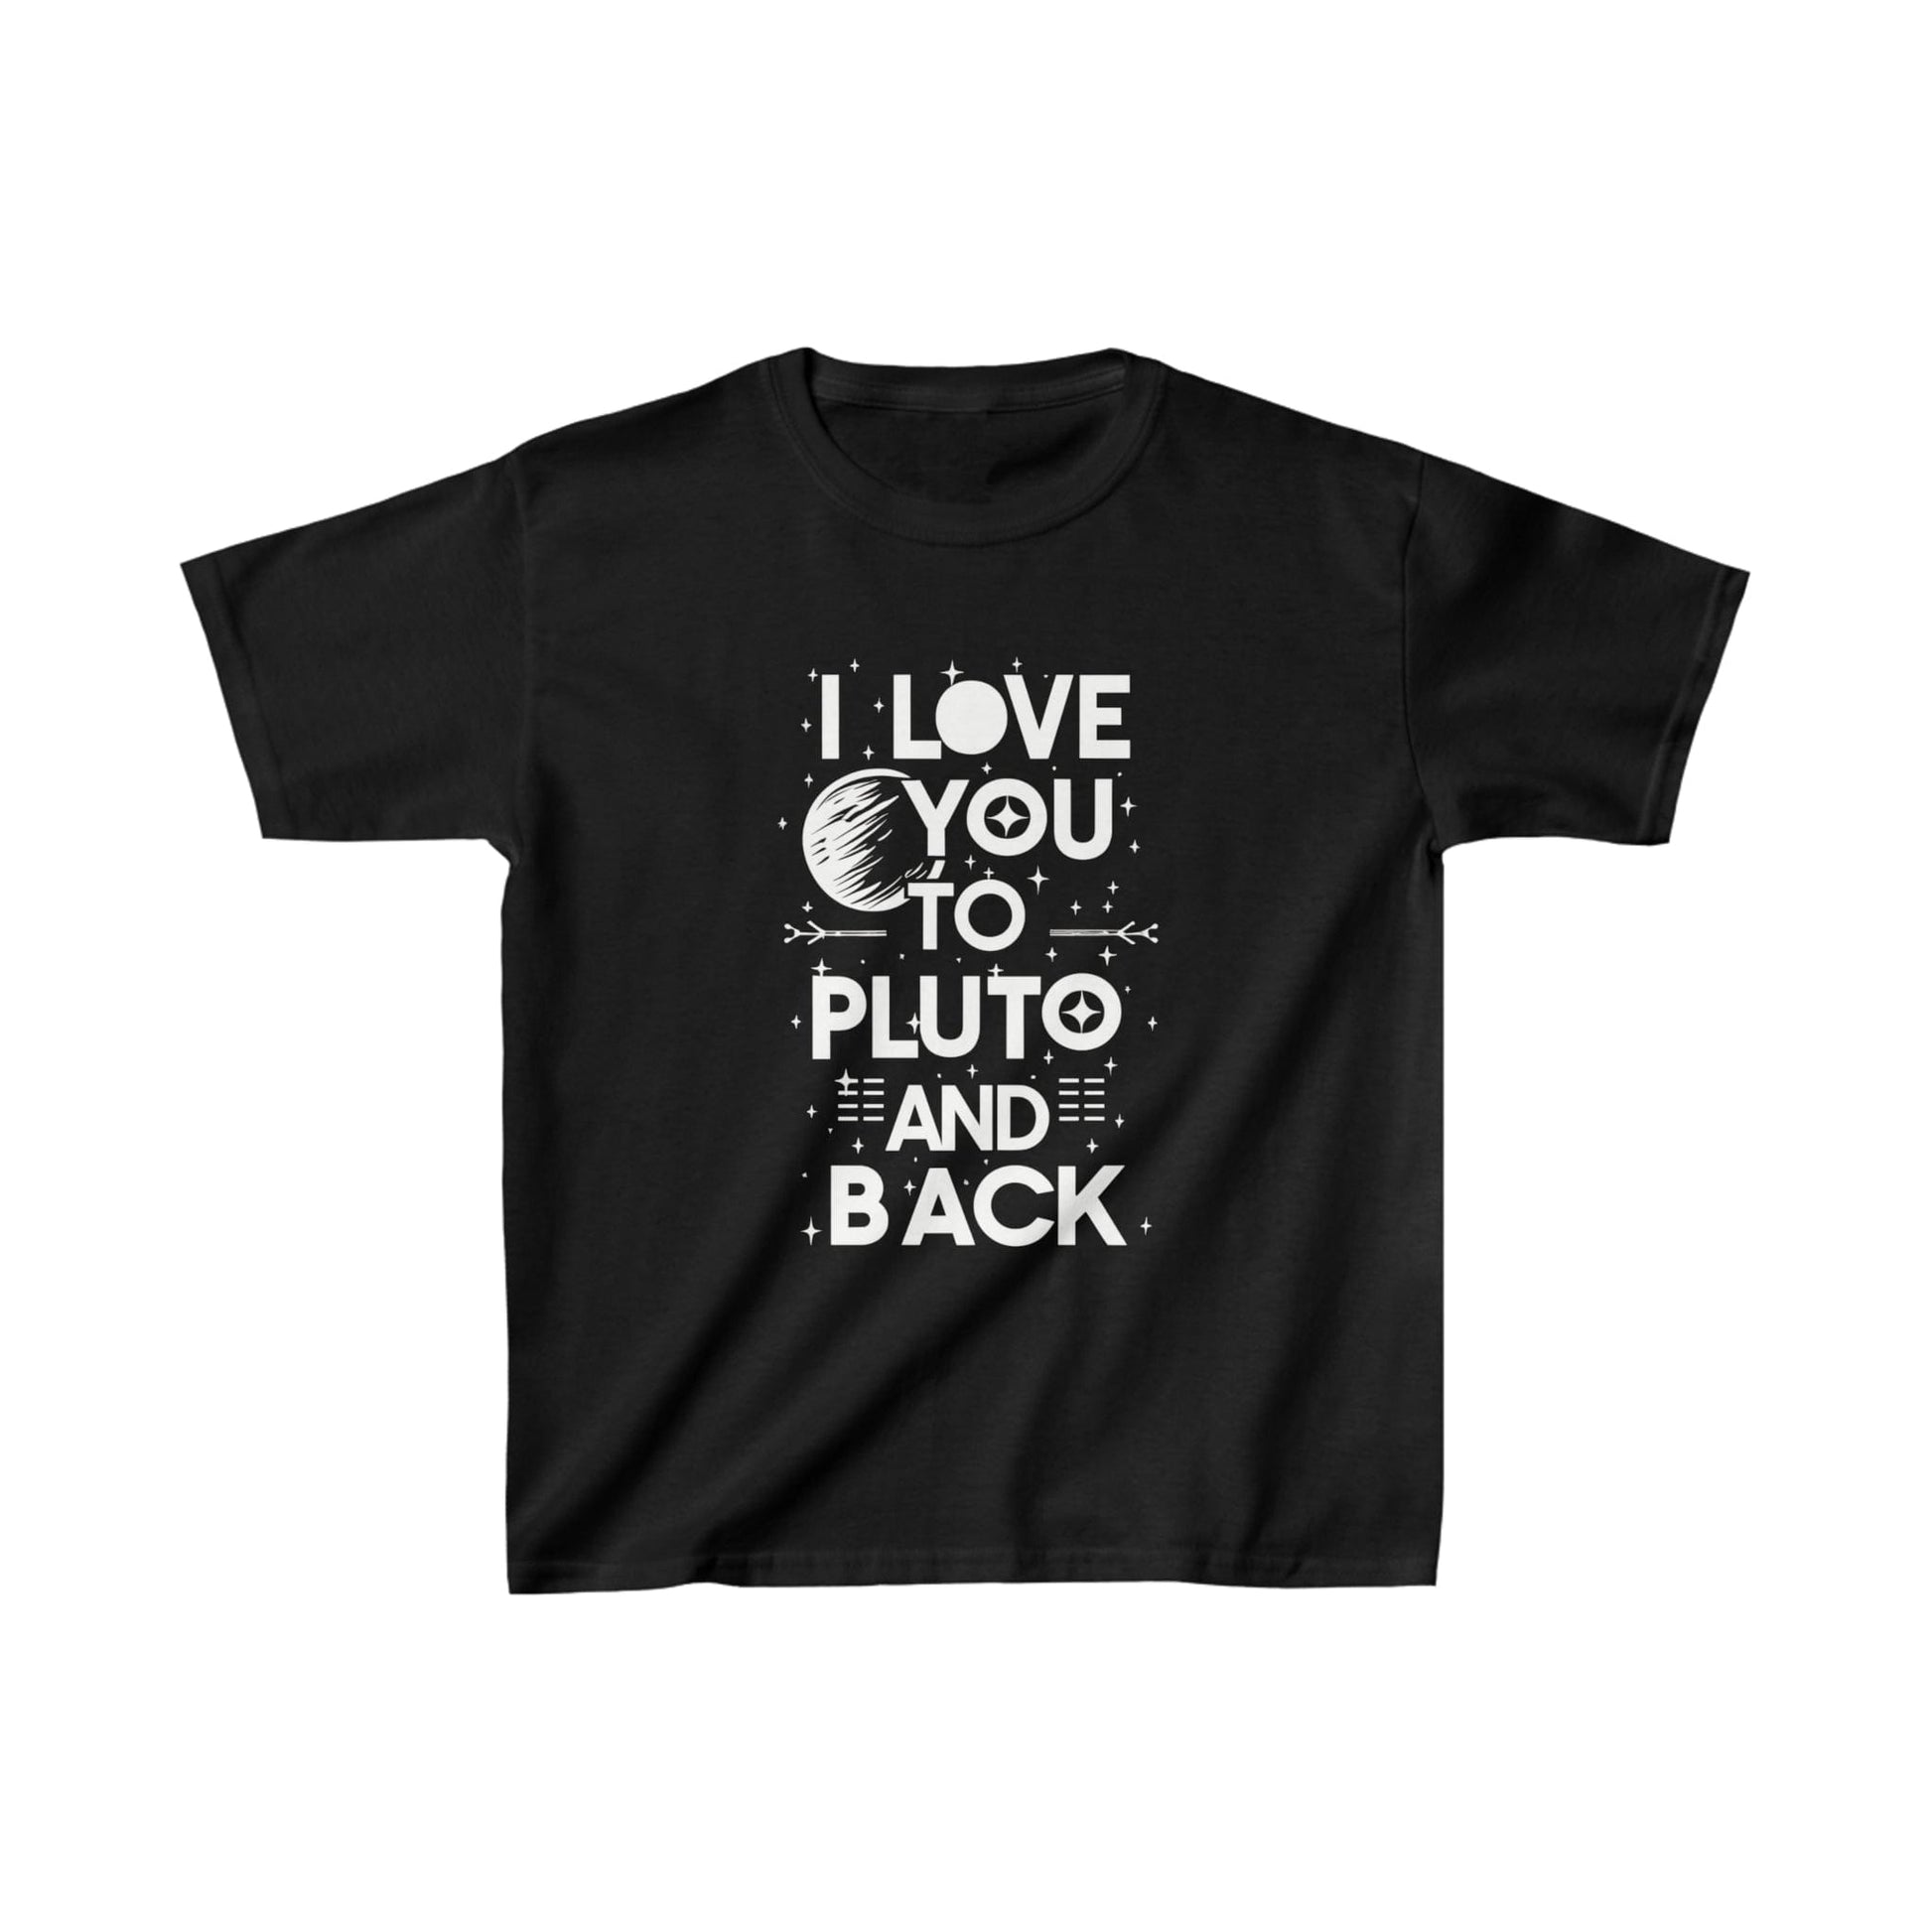 Kids clothes XS / Black Youth I Love You to Pluto T-Shirt